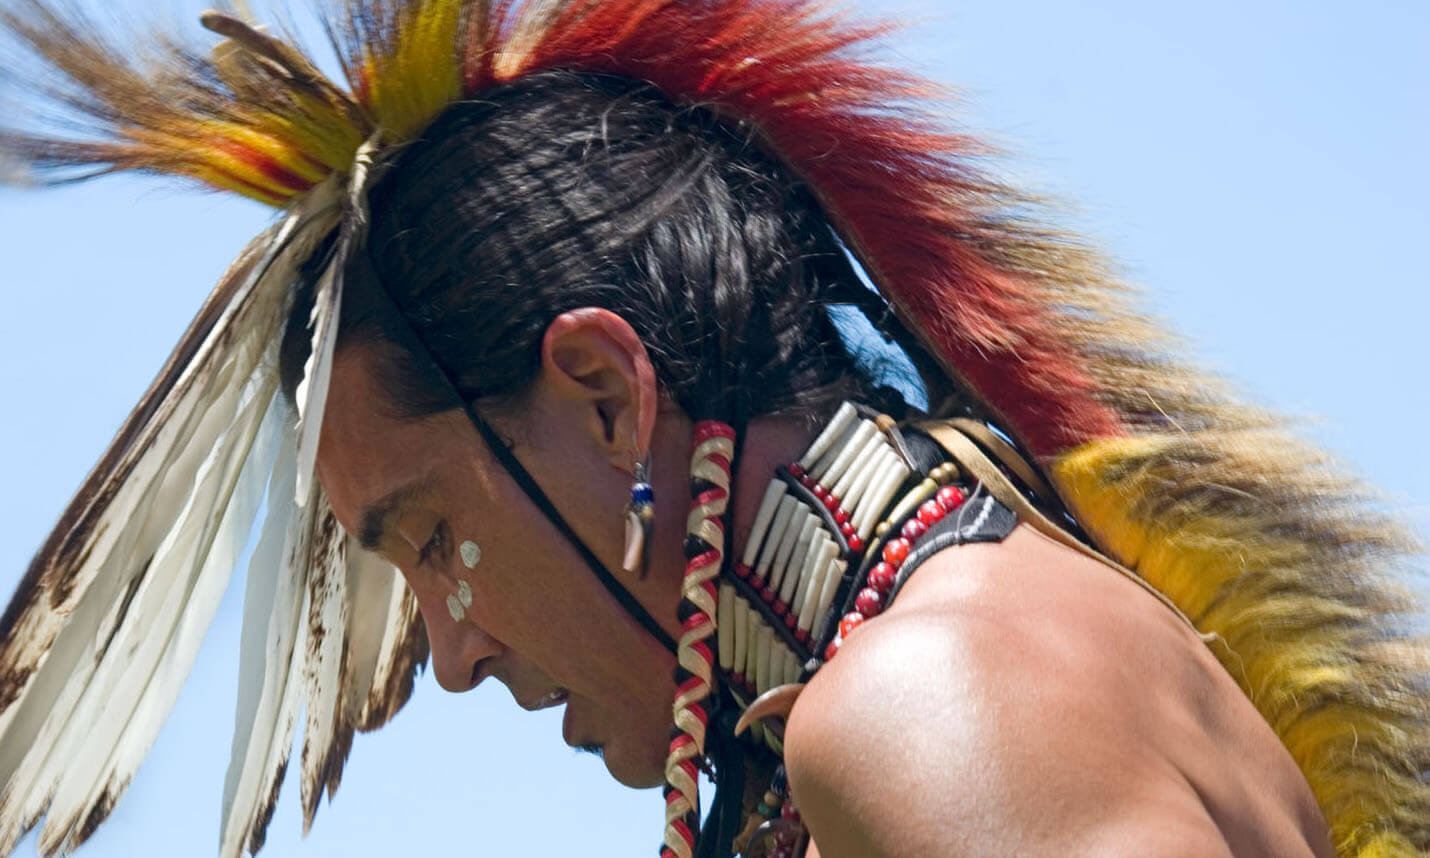 Profile of a Native American wearing a feathered headdress